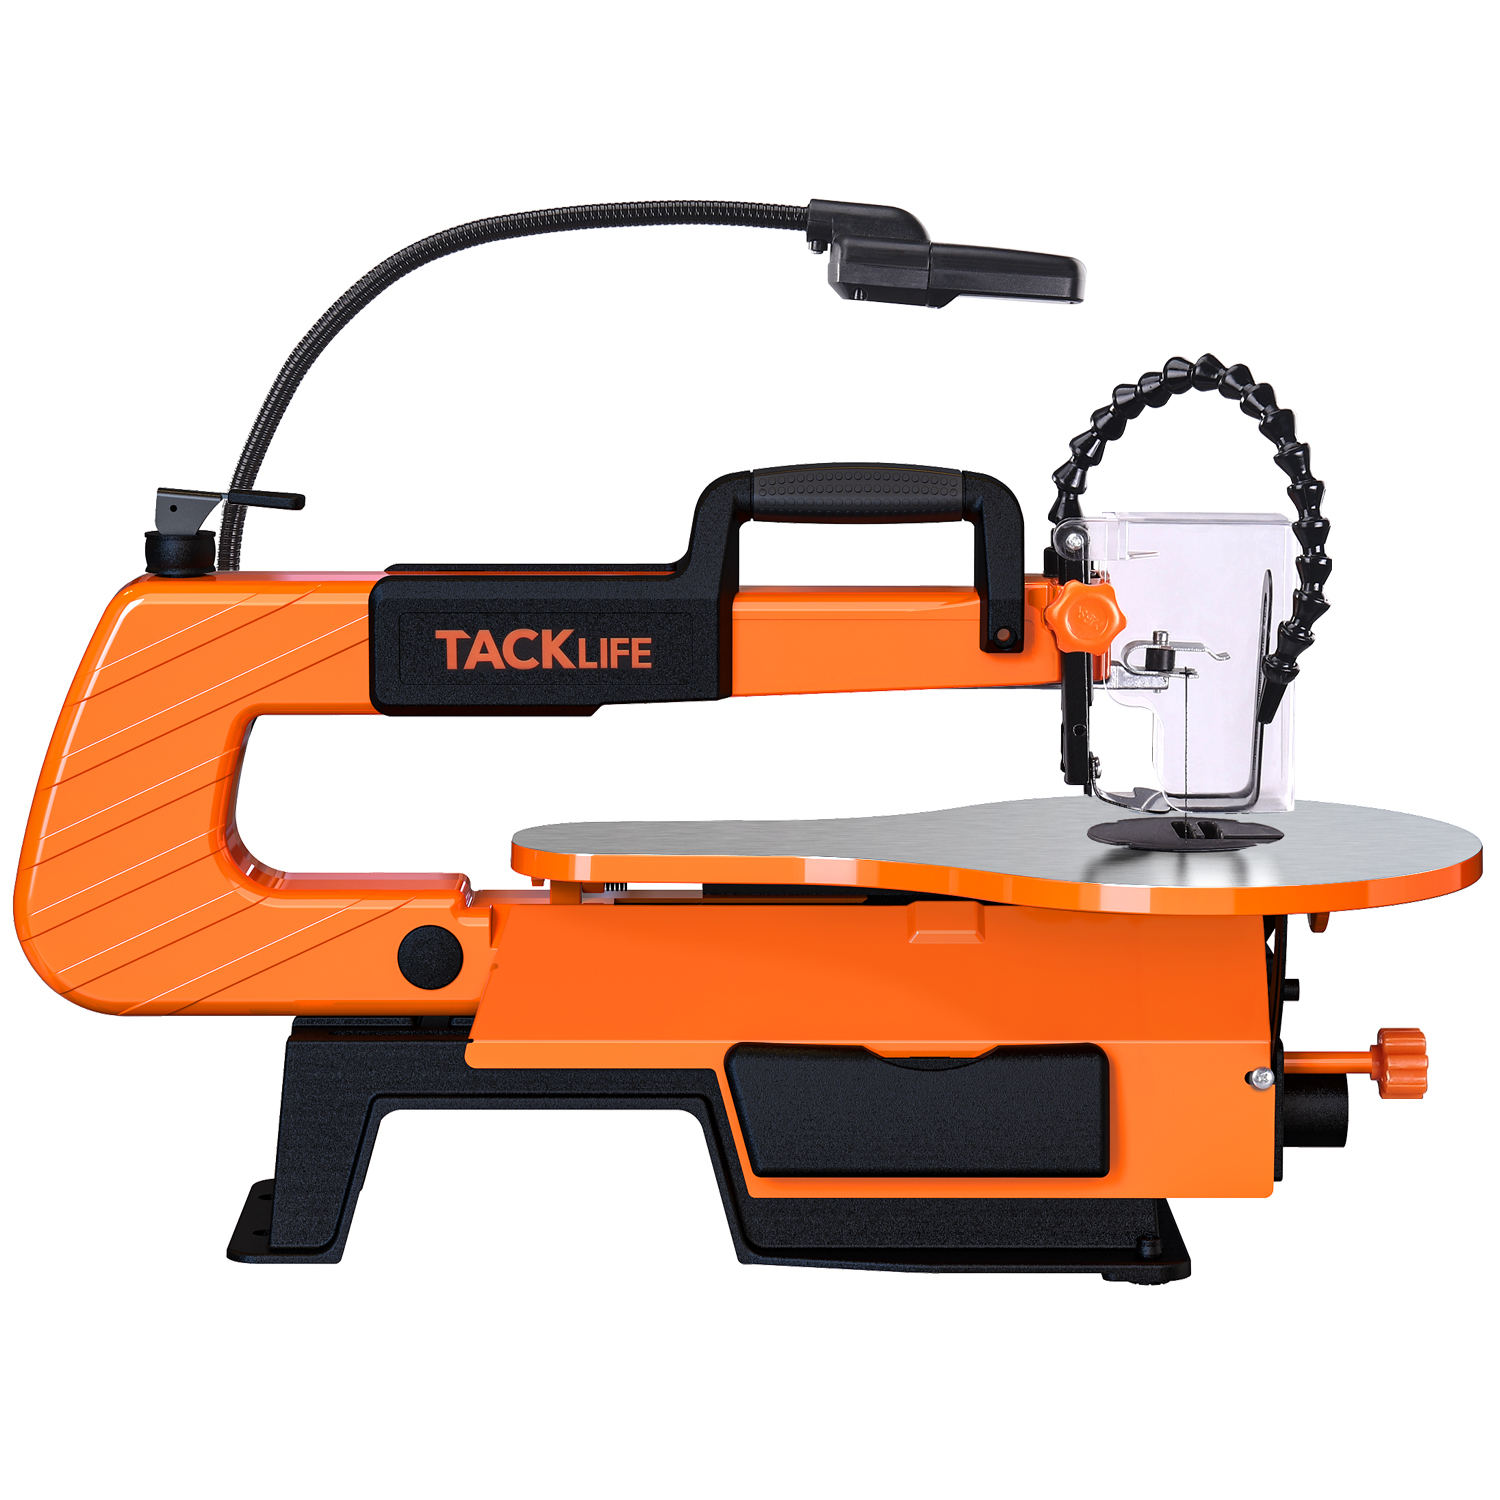 TACKLIFE Scroll Saw, 500-1700 SPM Variable Speed Scroll Saw with Flexible  Shaft Grinder (31 Accessories), Foot Switch, LED, Air pump -TLSS01A